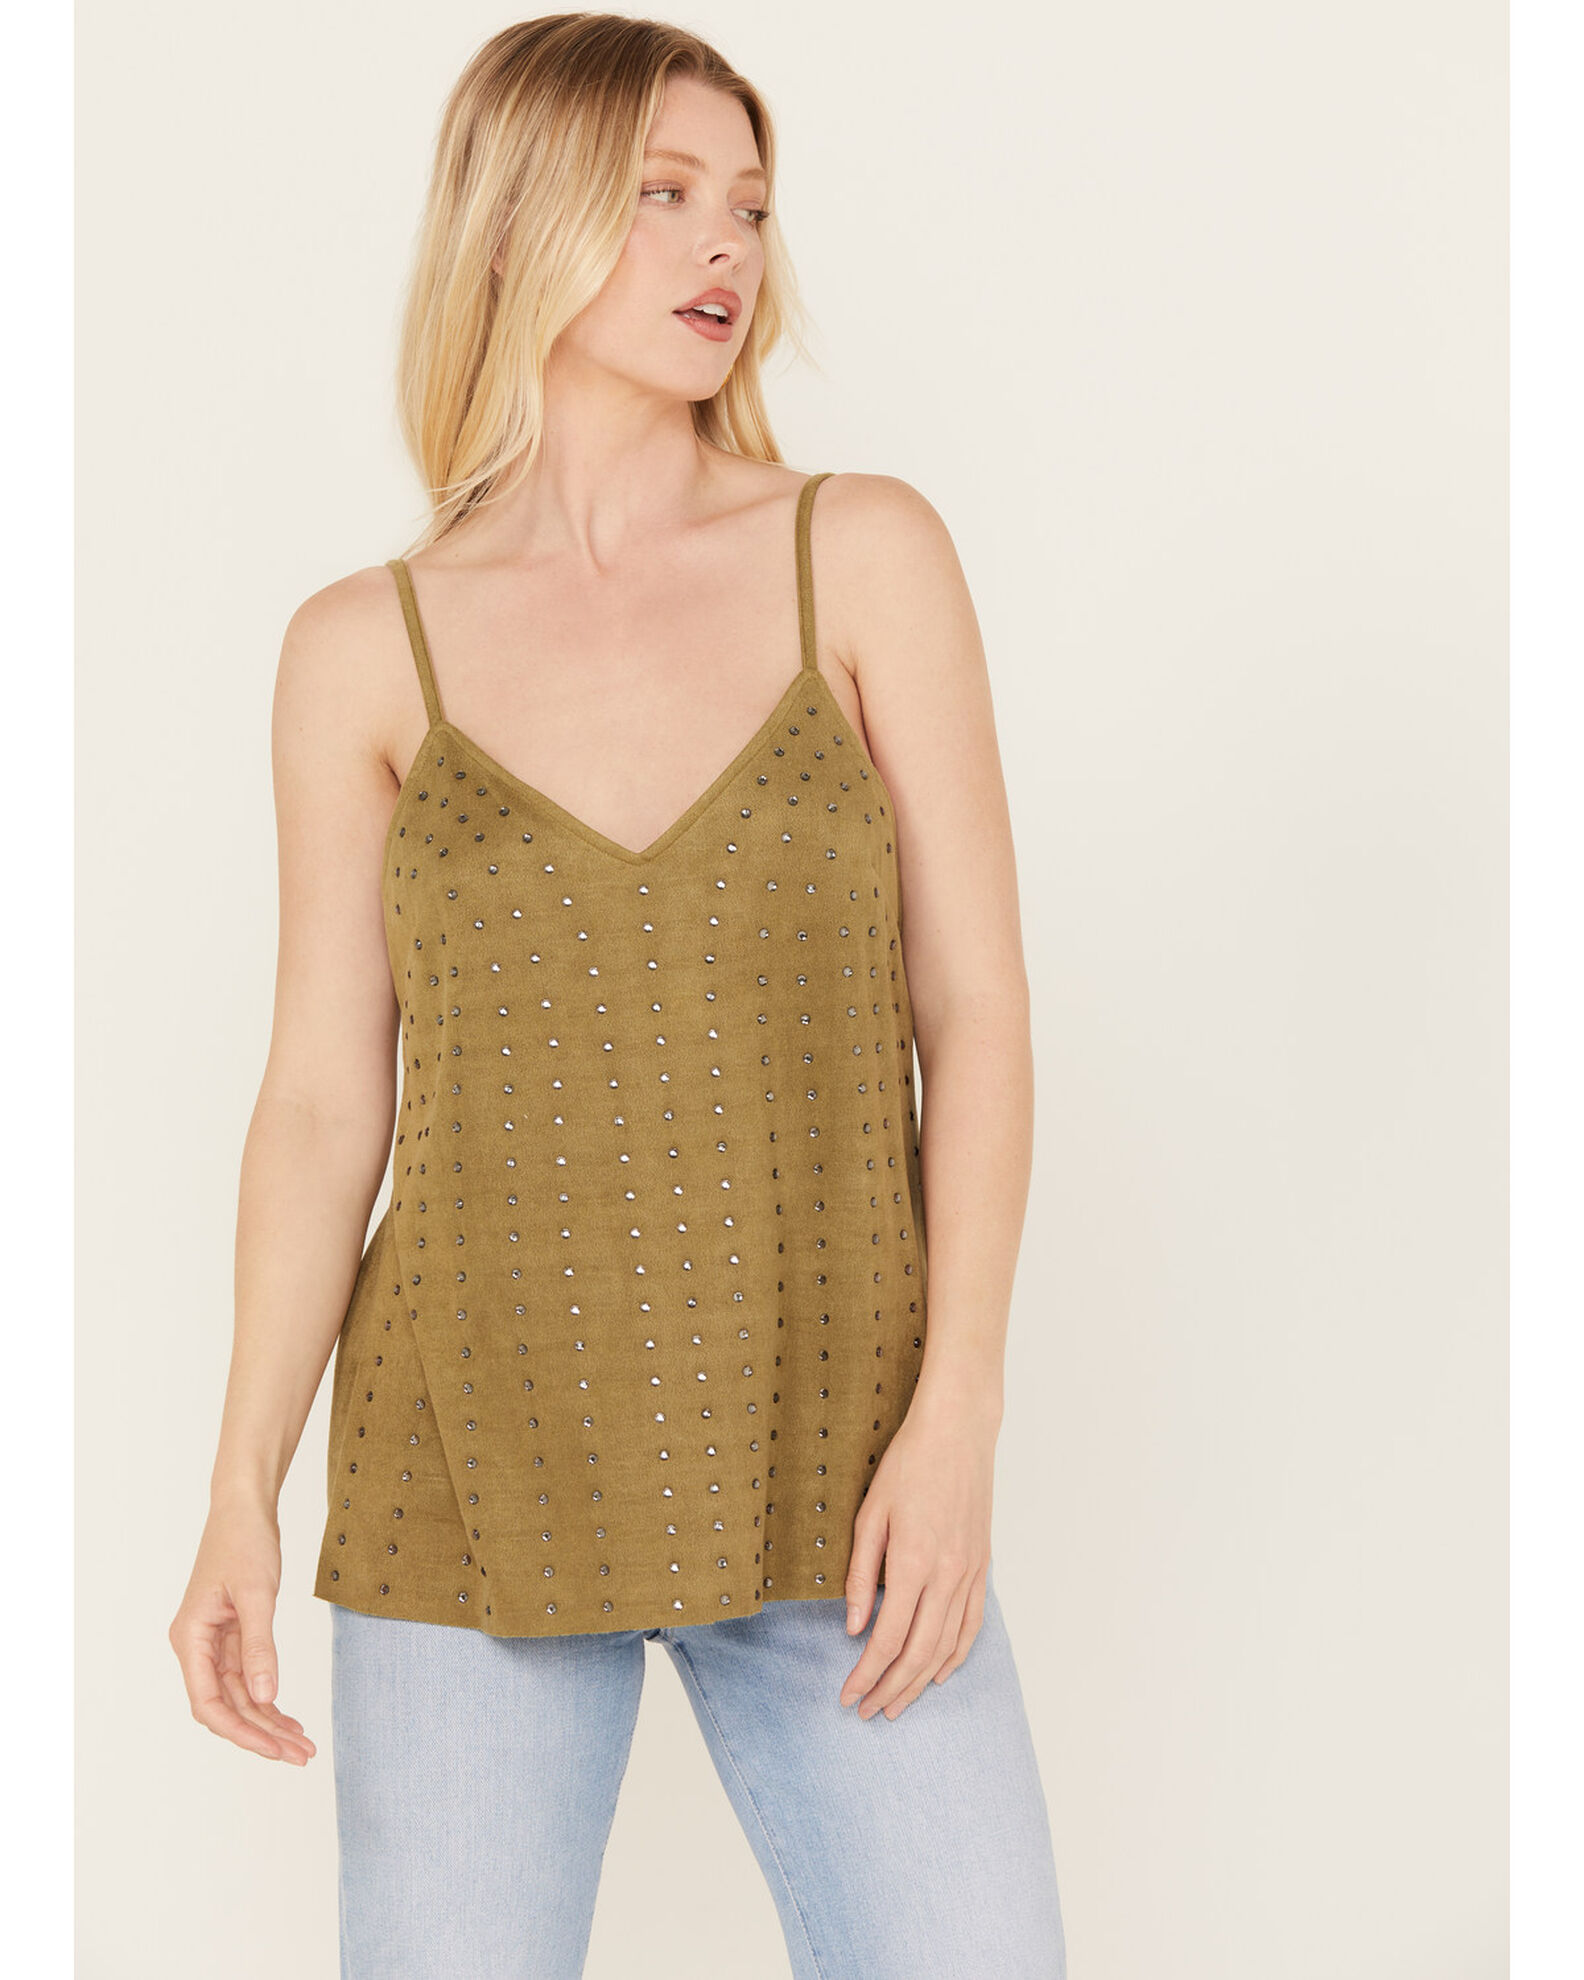 Vocal Women's Studded Faux Suede Cami Top